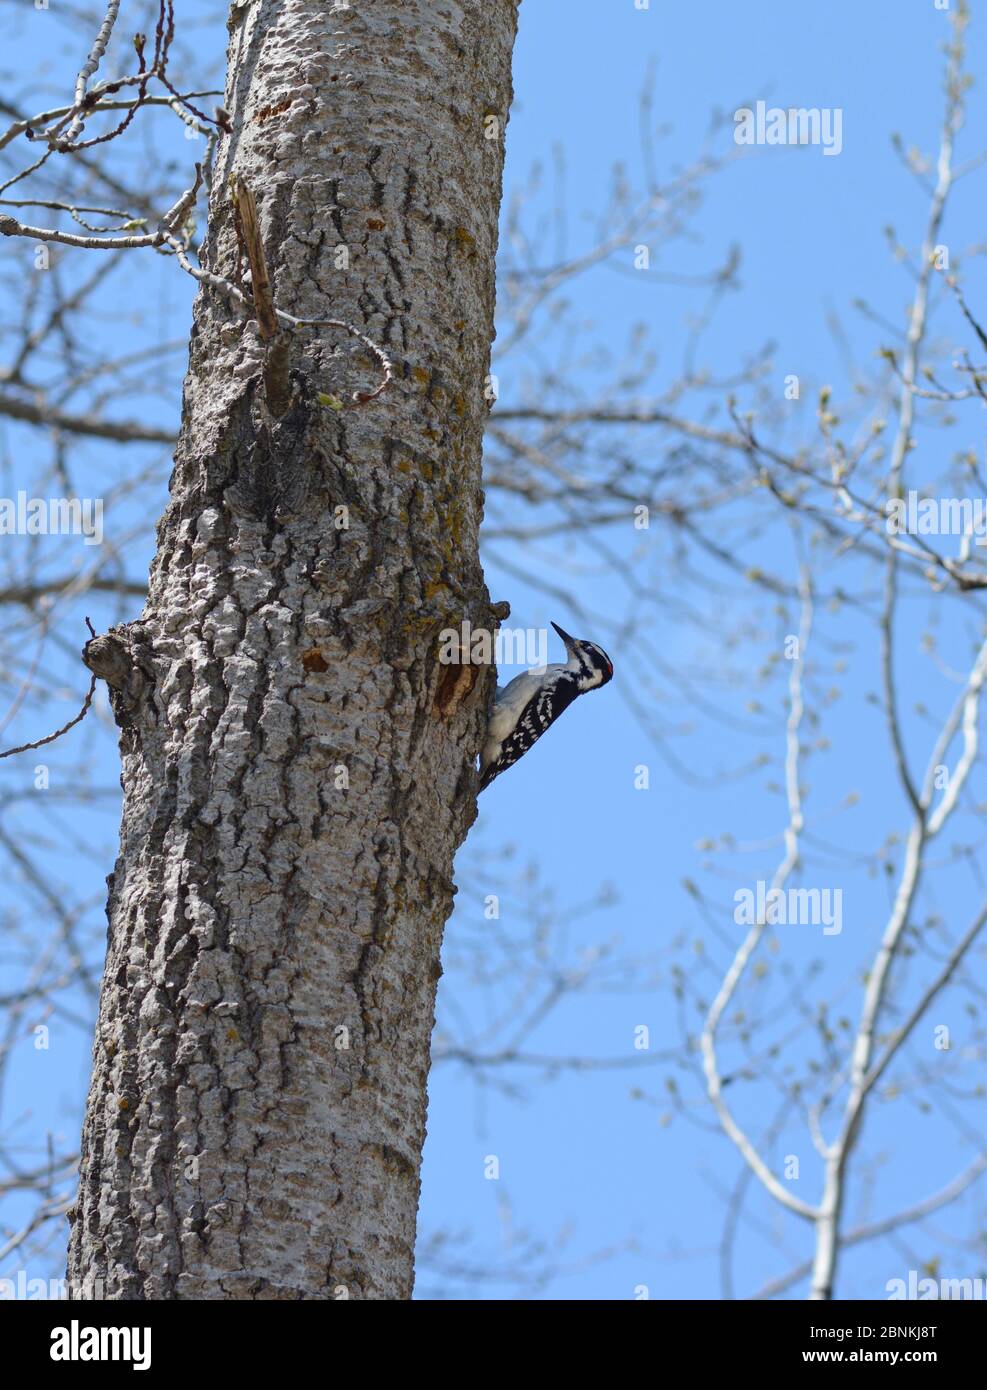 Hairy Woodpecker on a dead tree against a blue sky background. Stock Photo